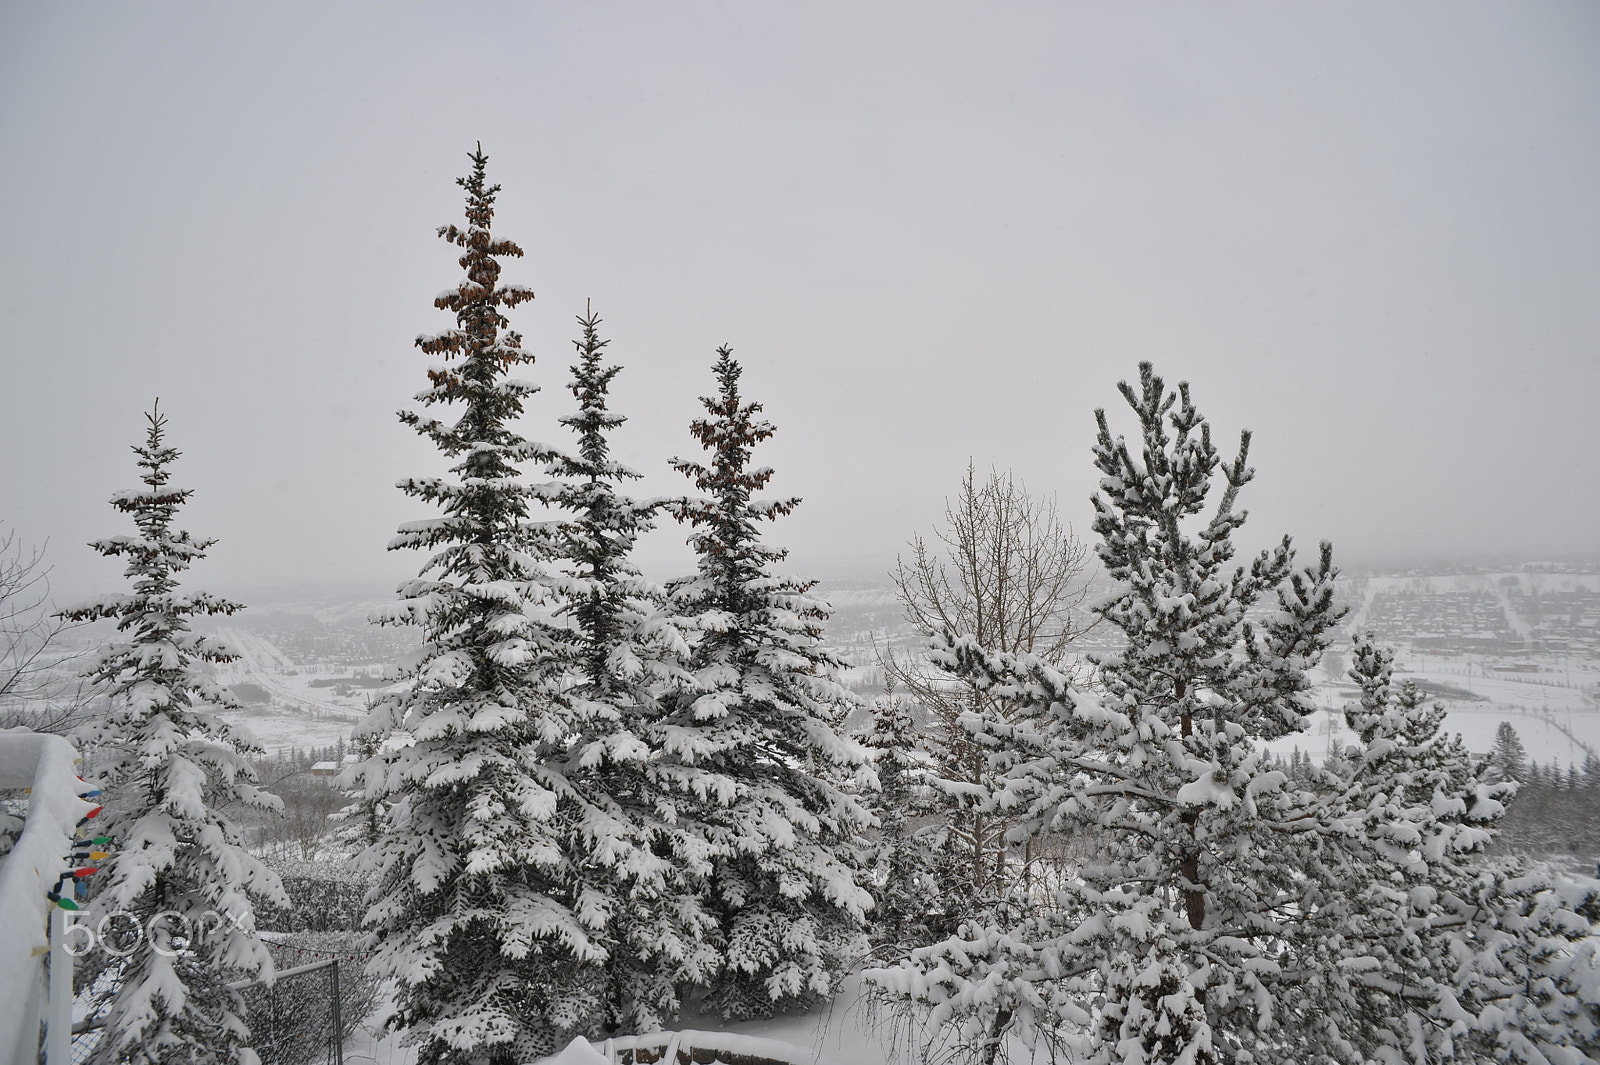 Nikon D700 + AF Nikkor 20mm f/2.8 sample photo. Evergreen trees in the snow day photography